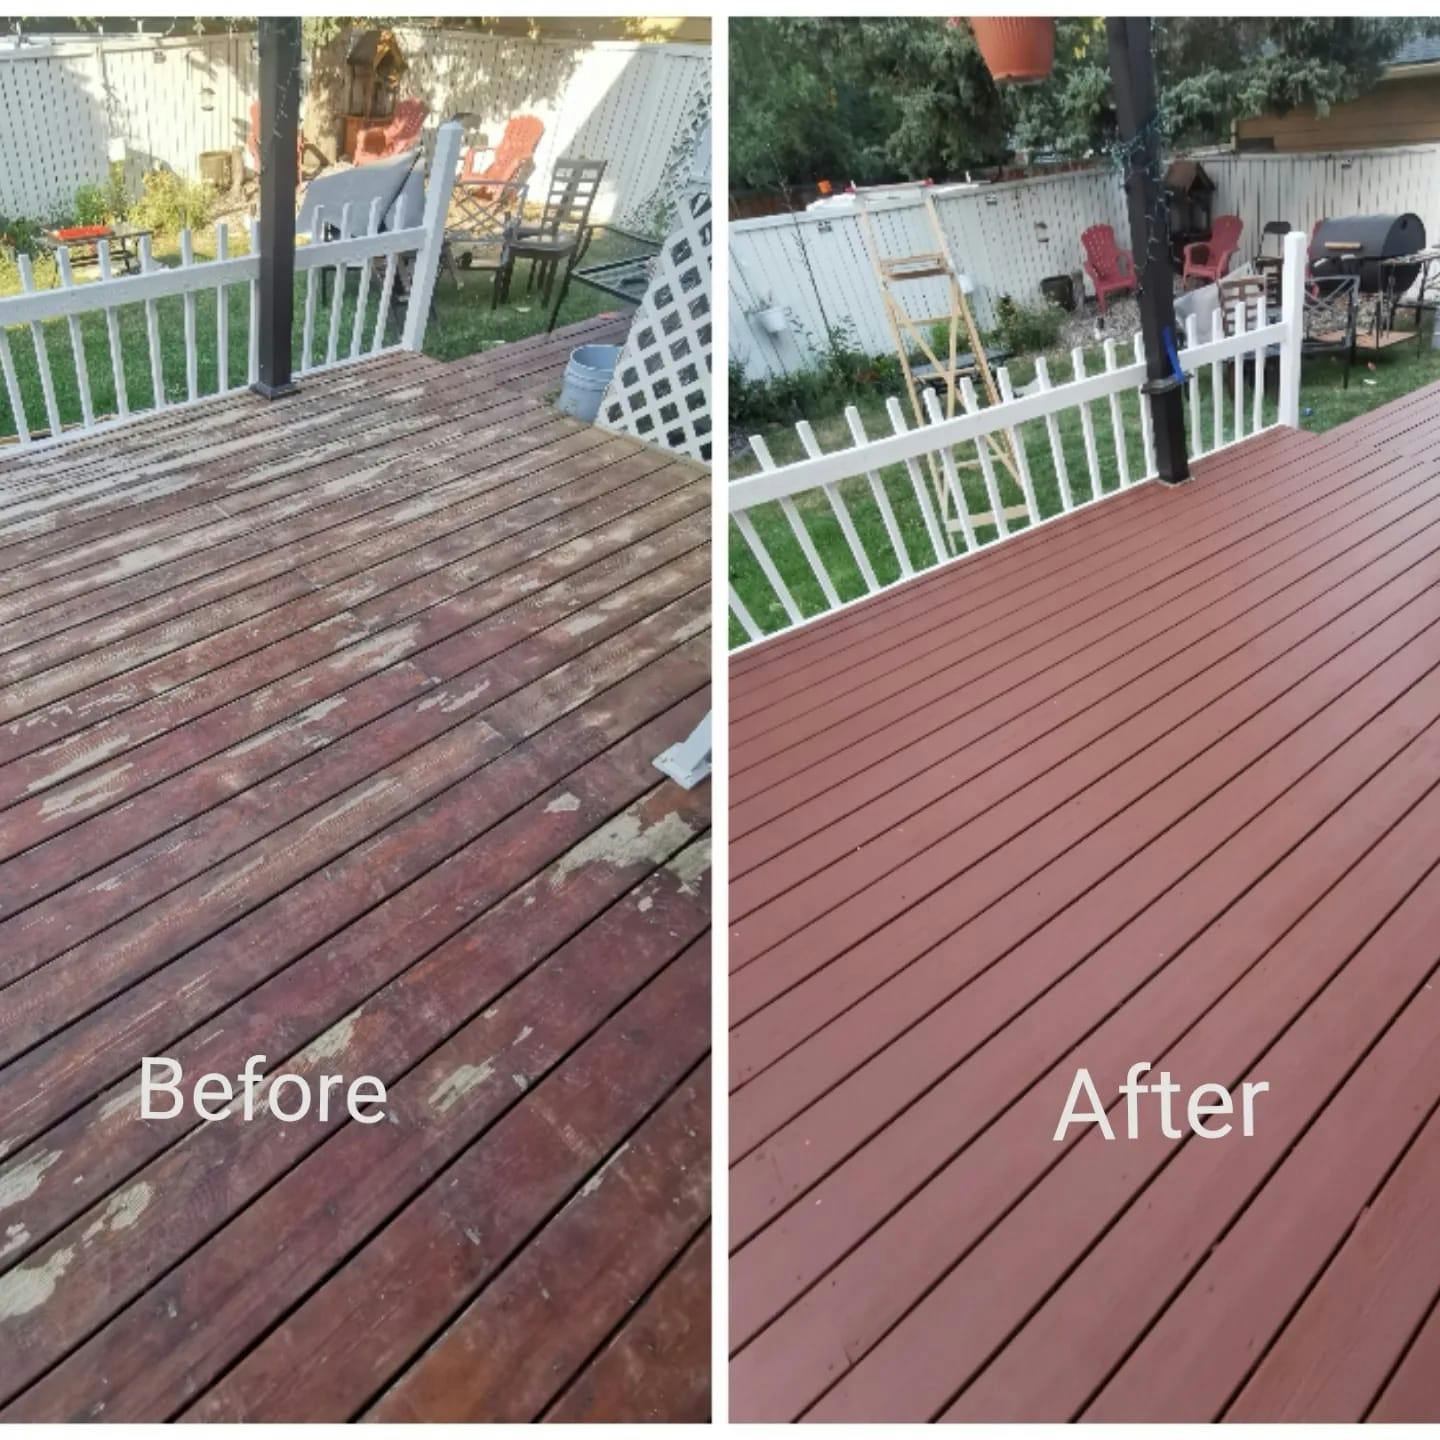 side bysmall image of a bigger  worn out deck and the same deck after sanded and re-stained with a red toupe colour